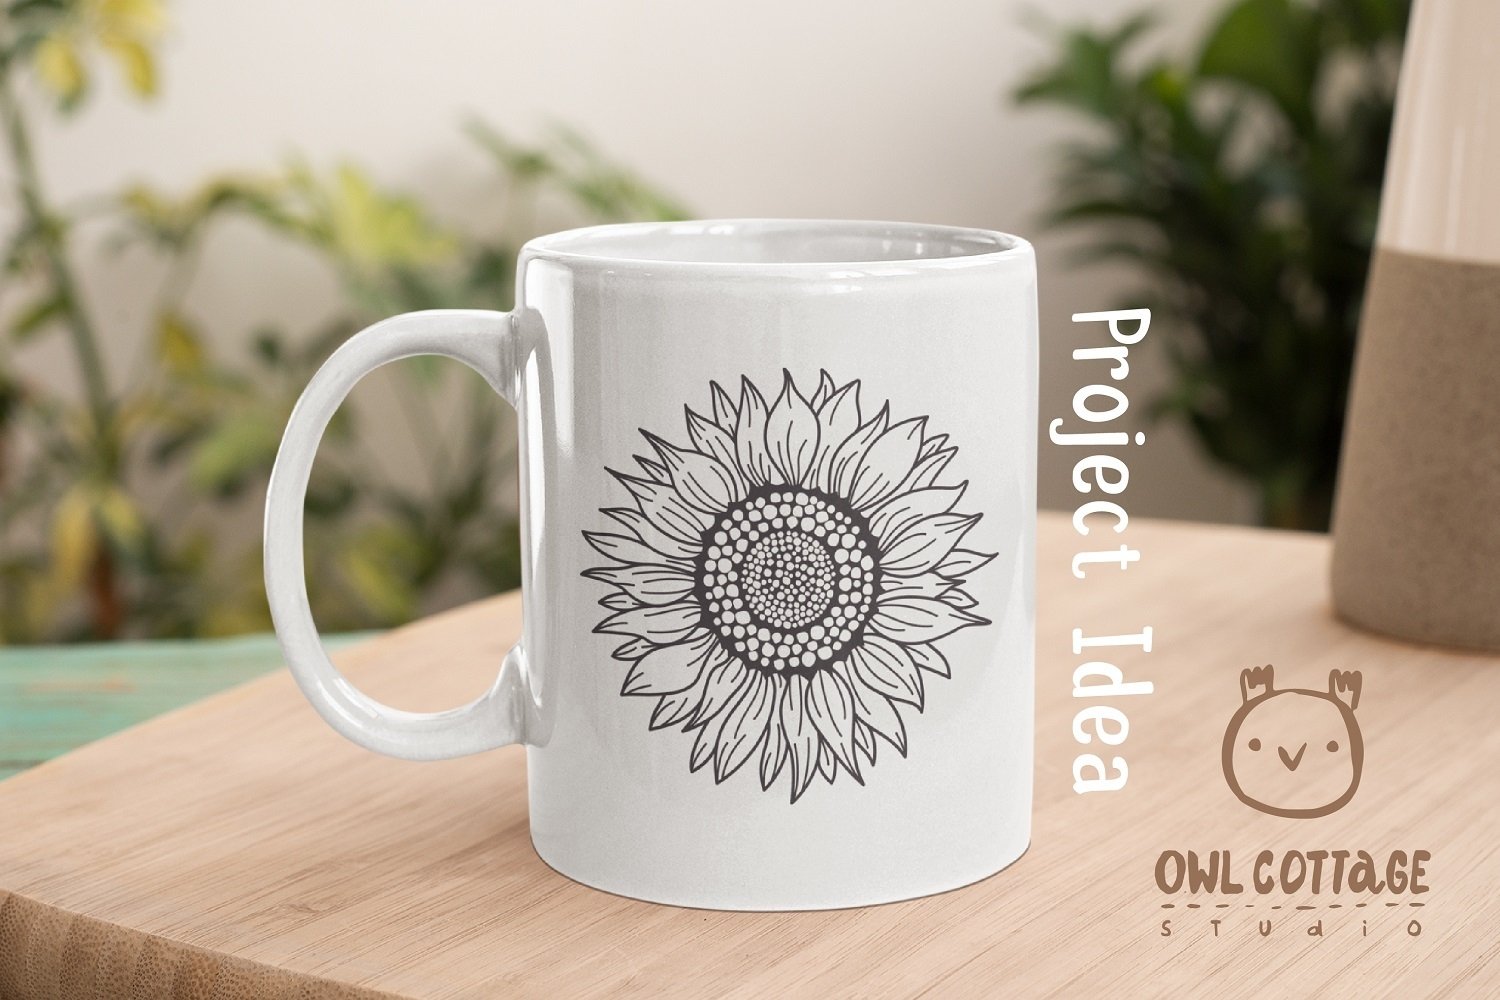 Black sunflower on the cup.